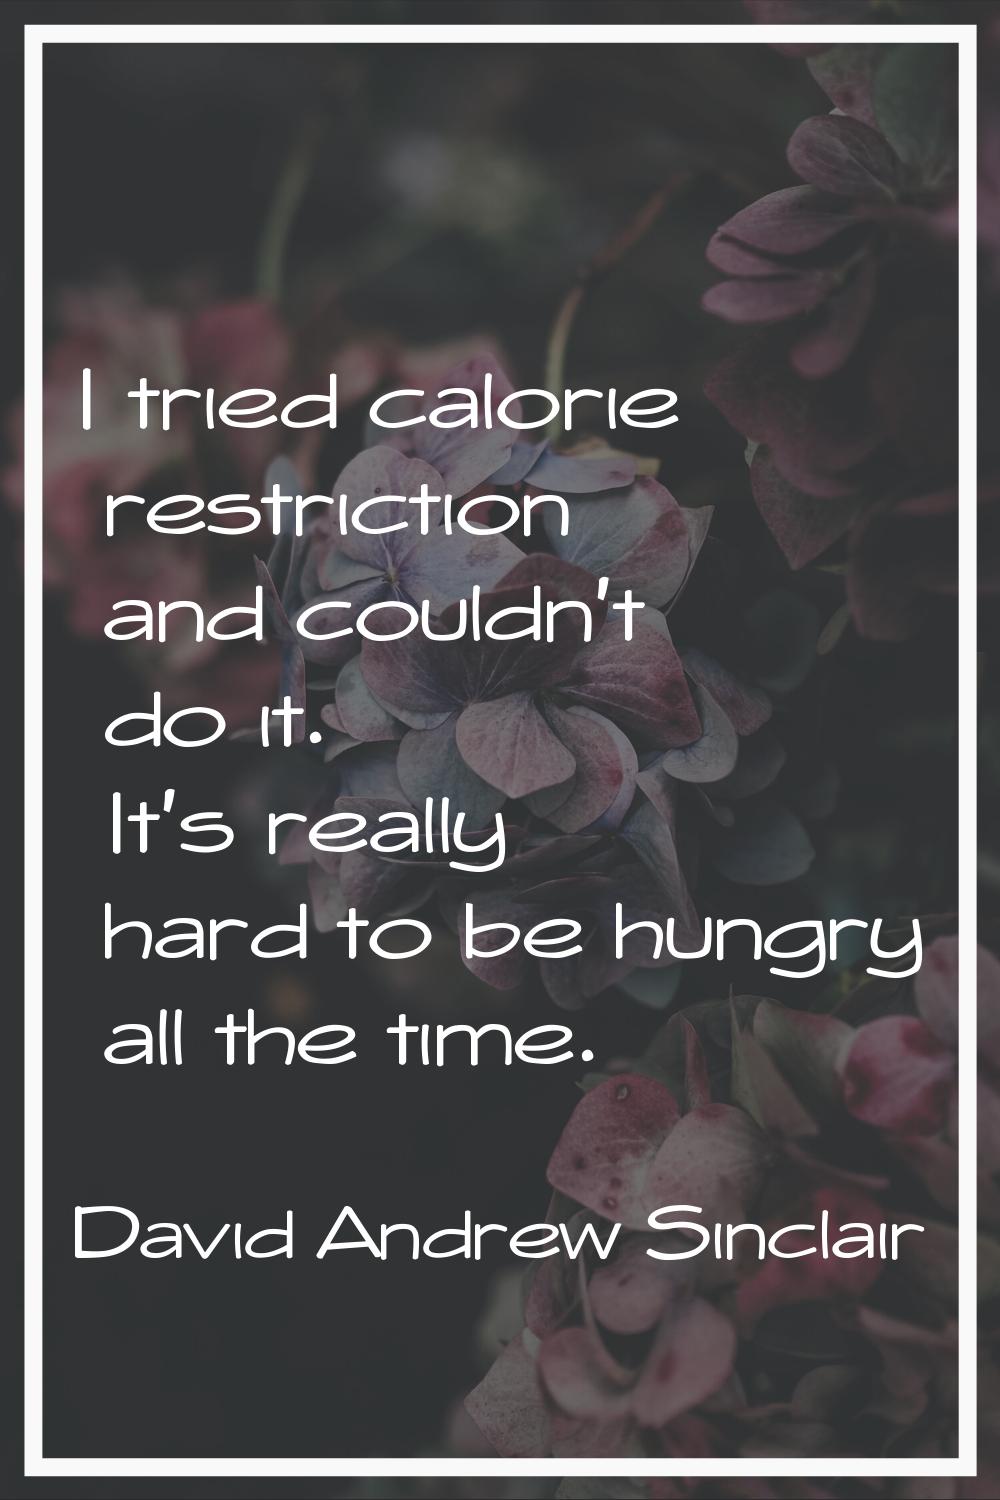 I tried calorie restriction and couldn't do it. It's really hard to be hungry all the time.